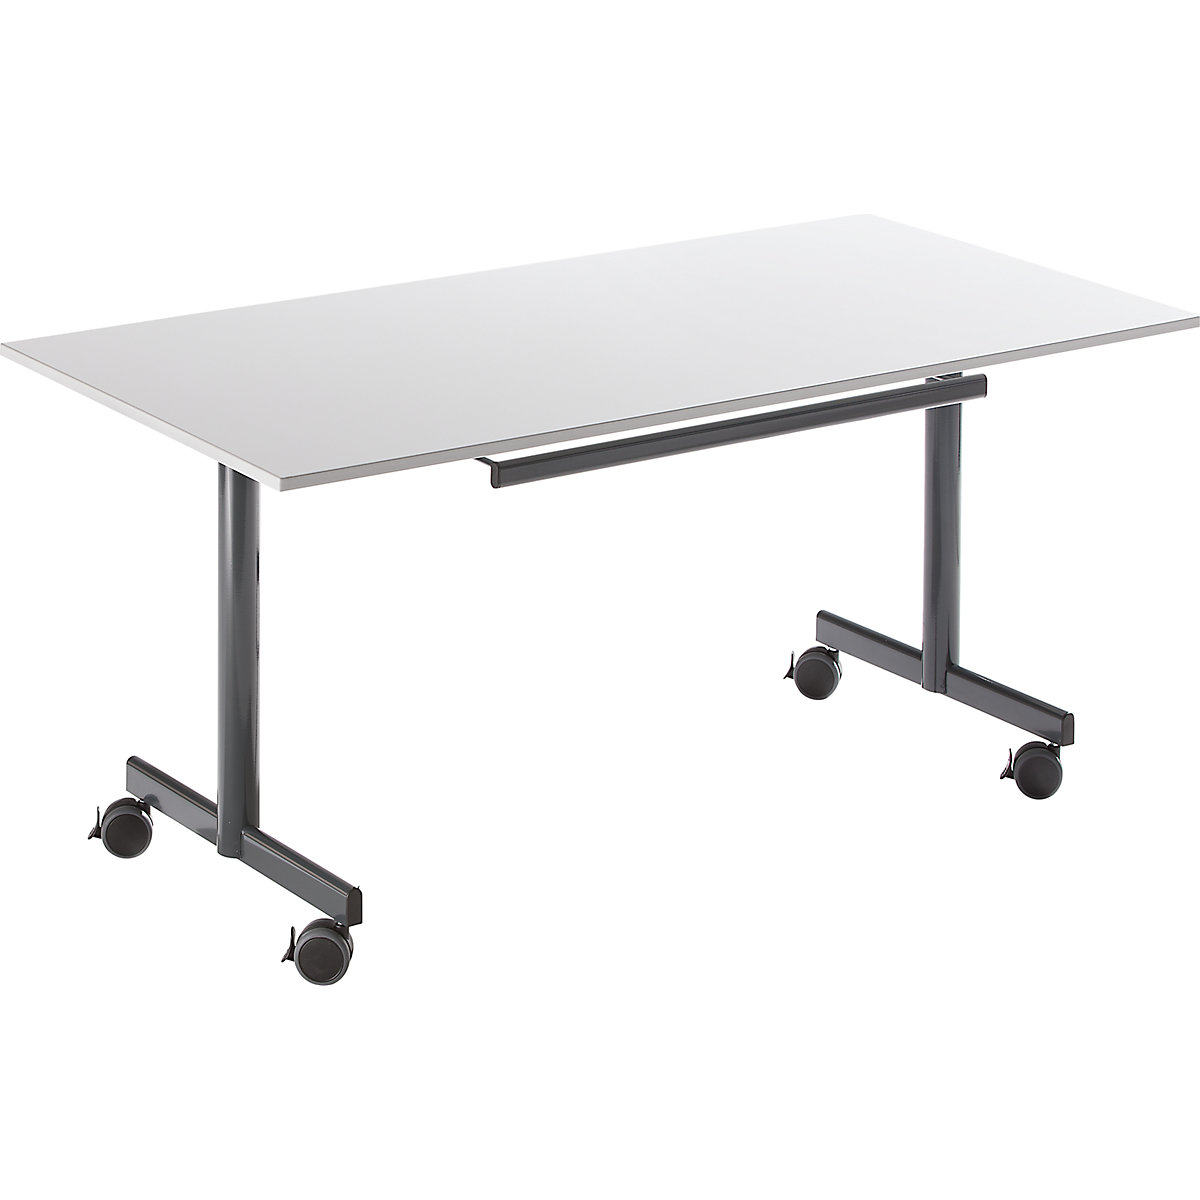 Table with folding top, mobile, HxWxD 720 x 1200 x 800 mm, grey-3